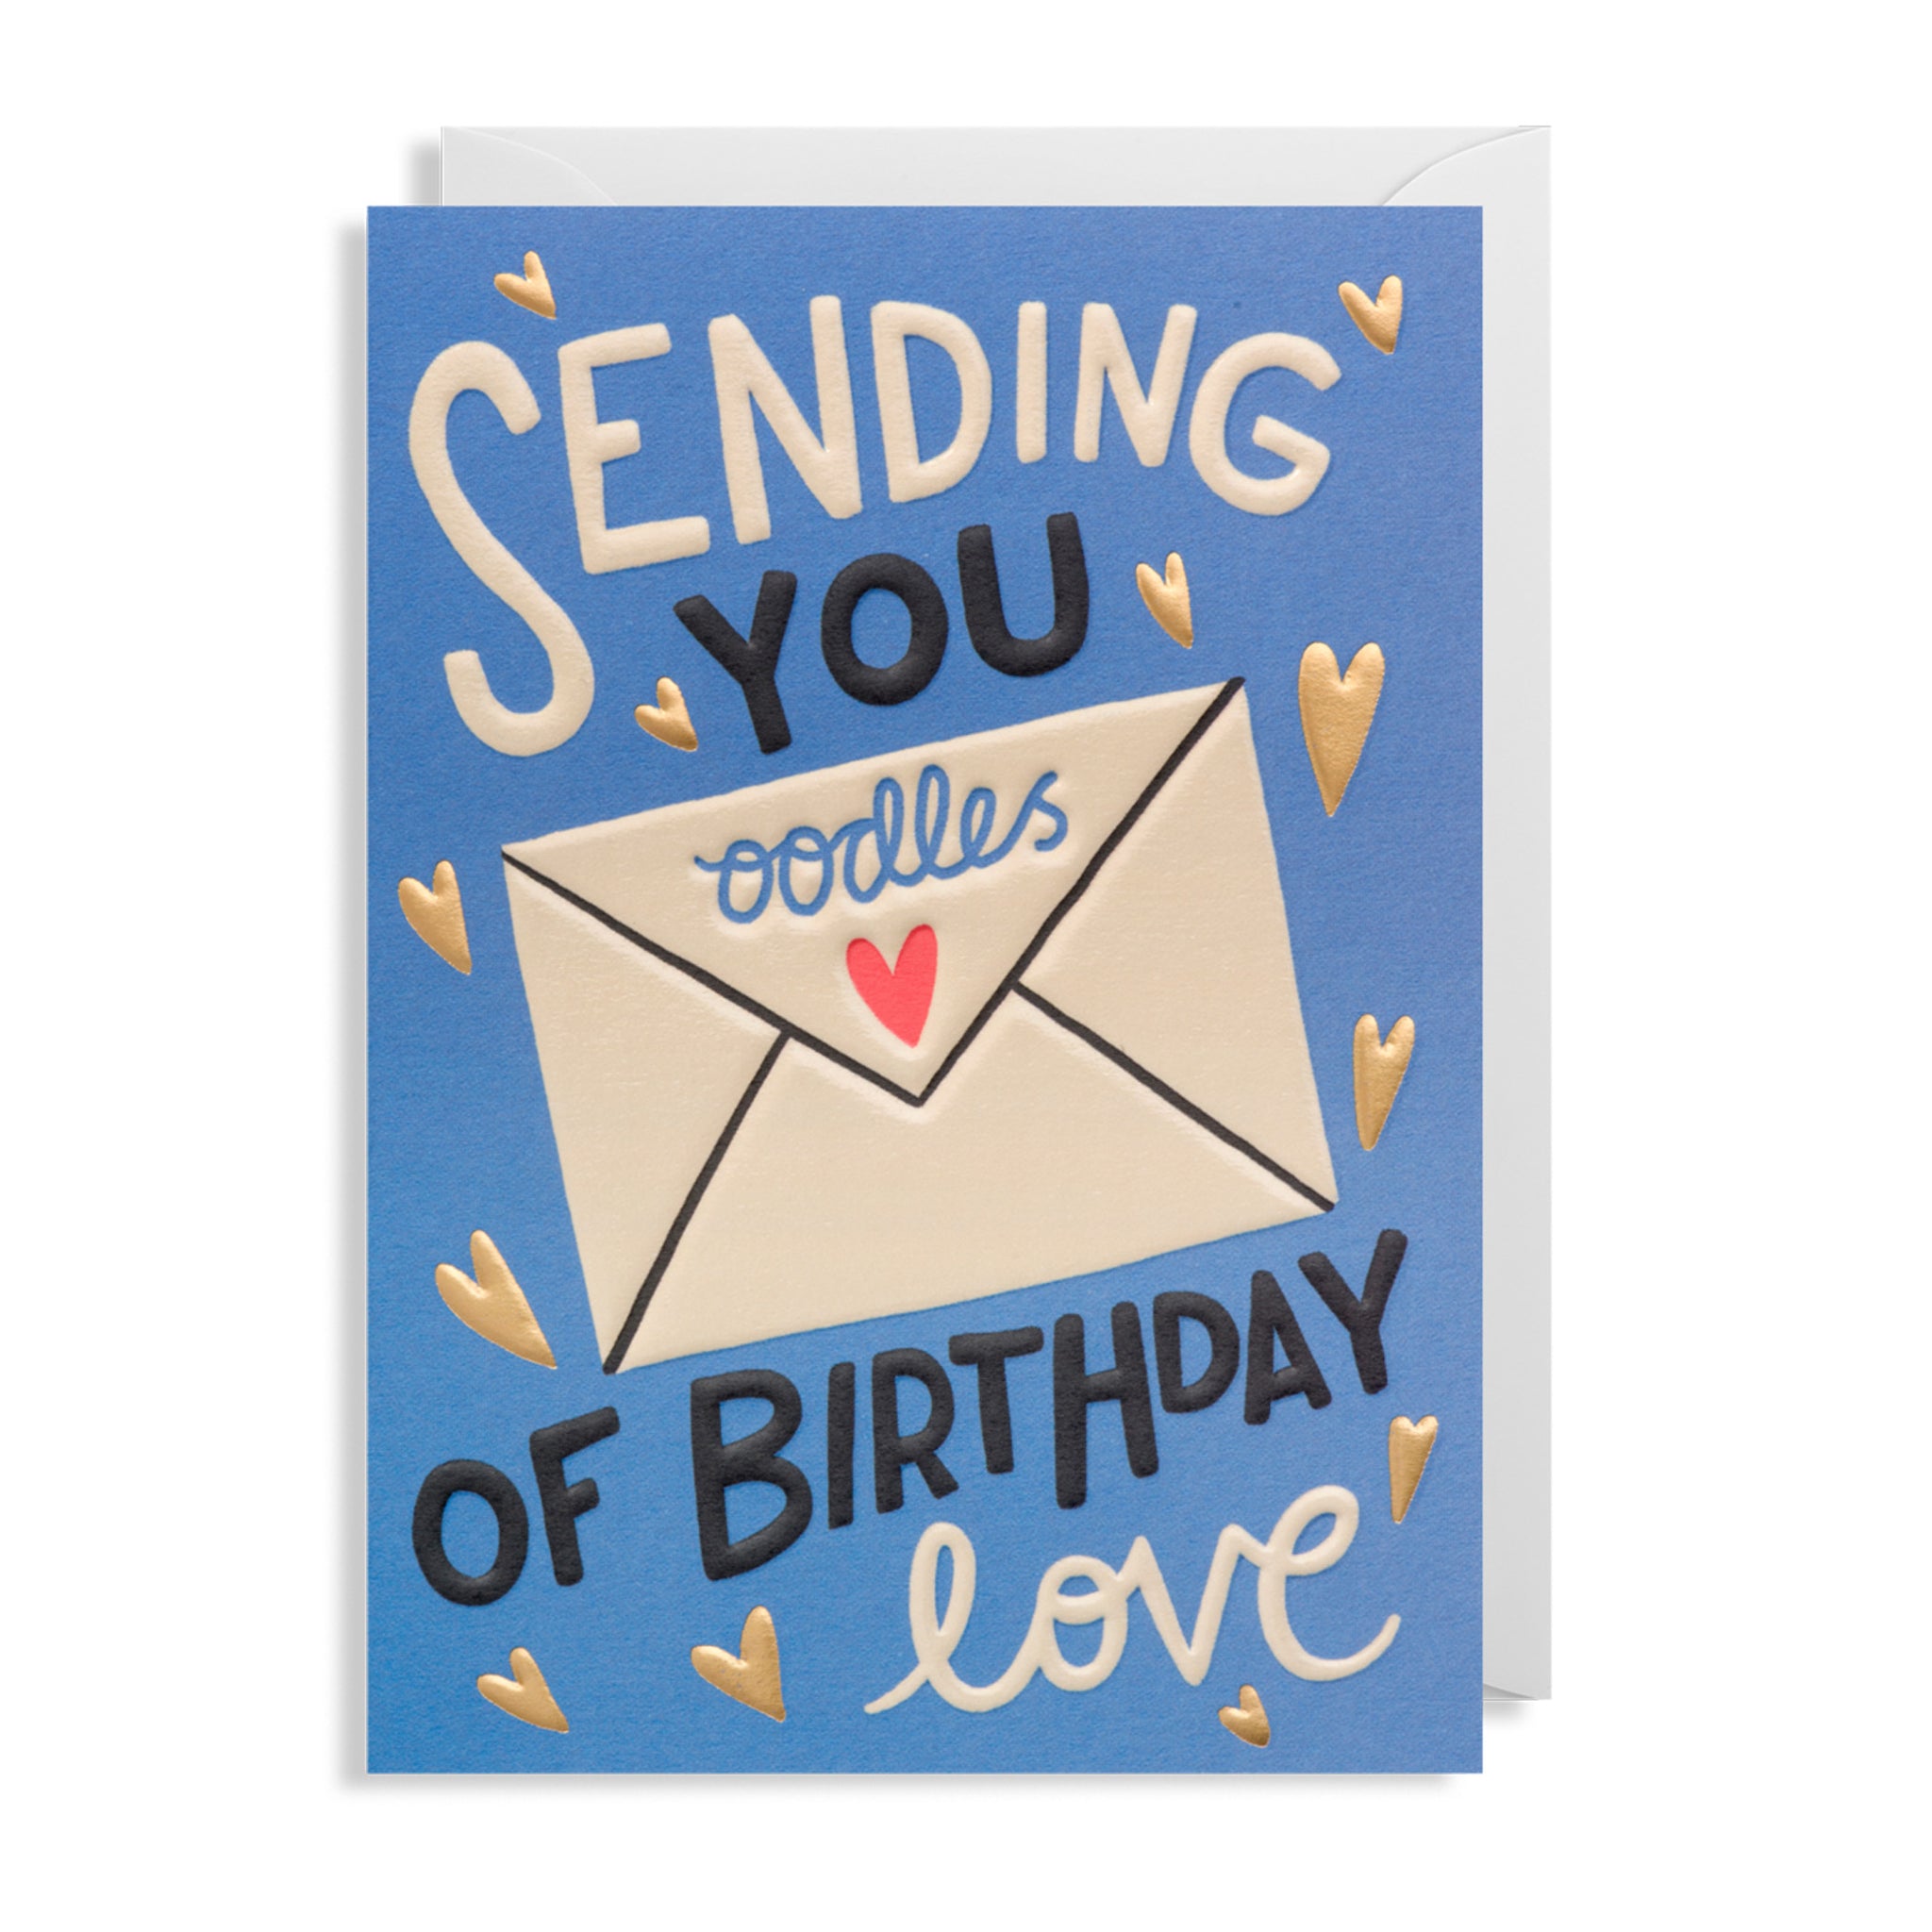 Sending You Oodles Of Birthday Love - Card